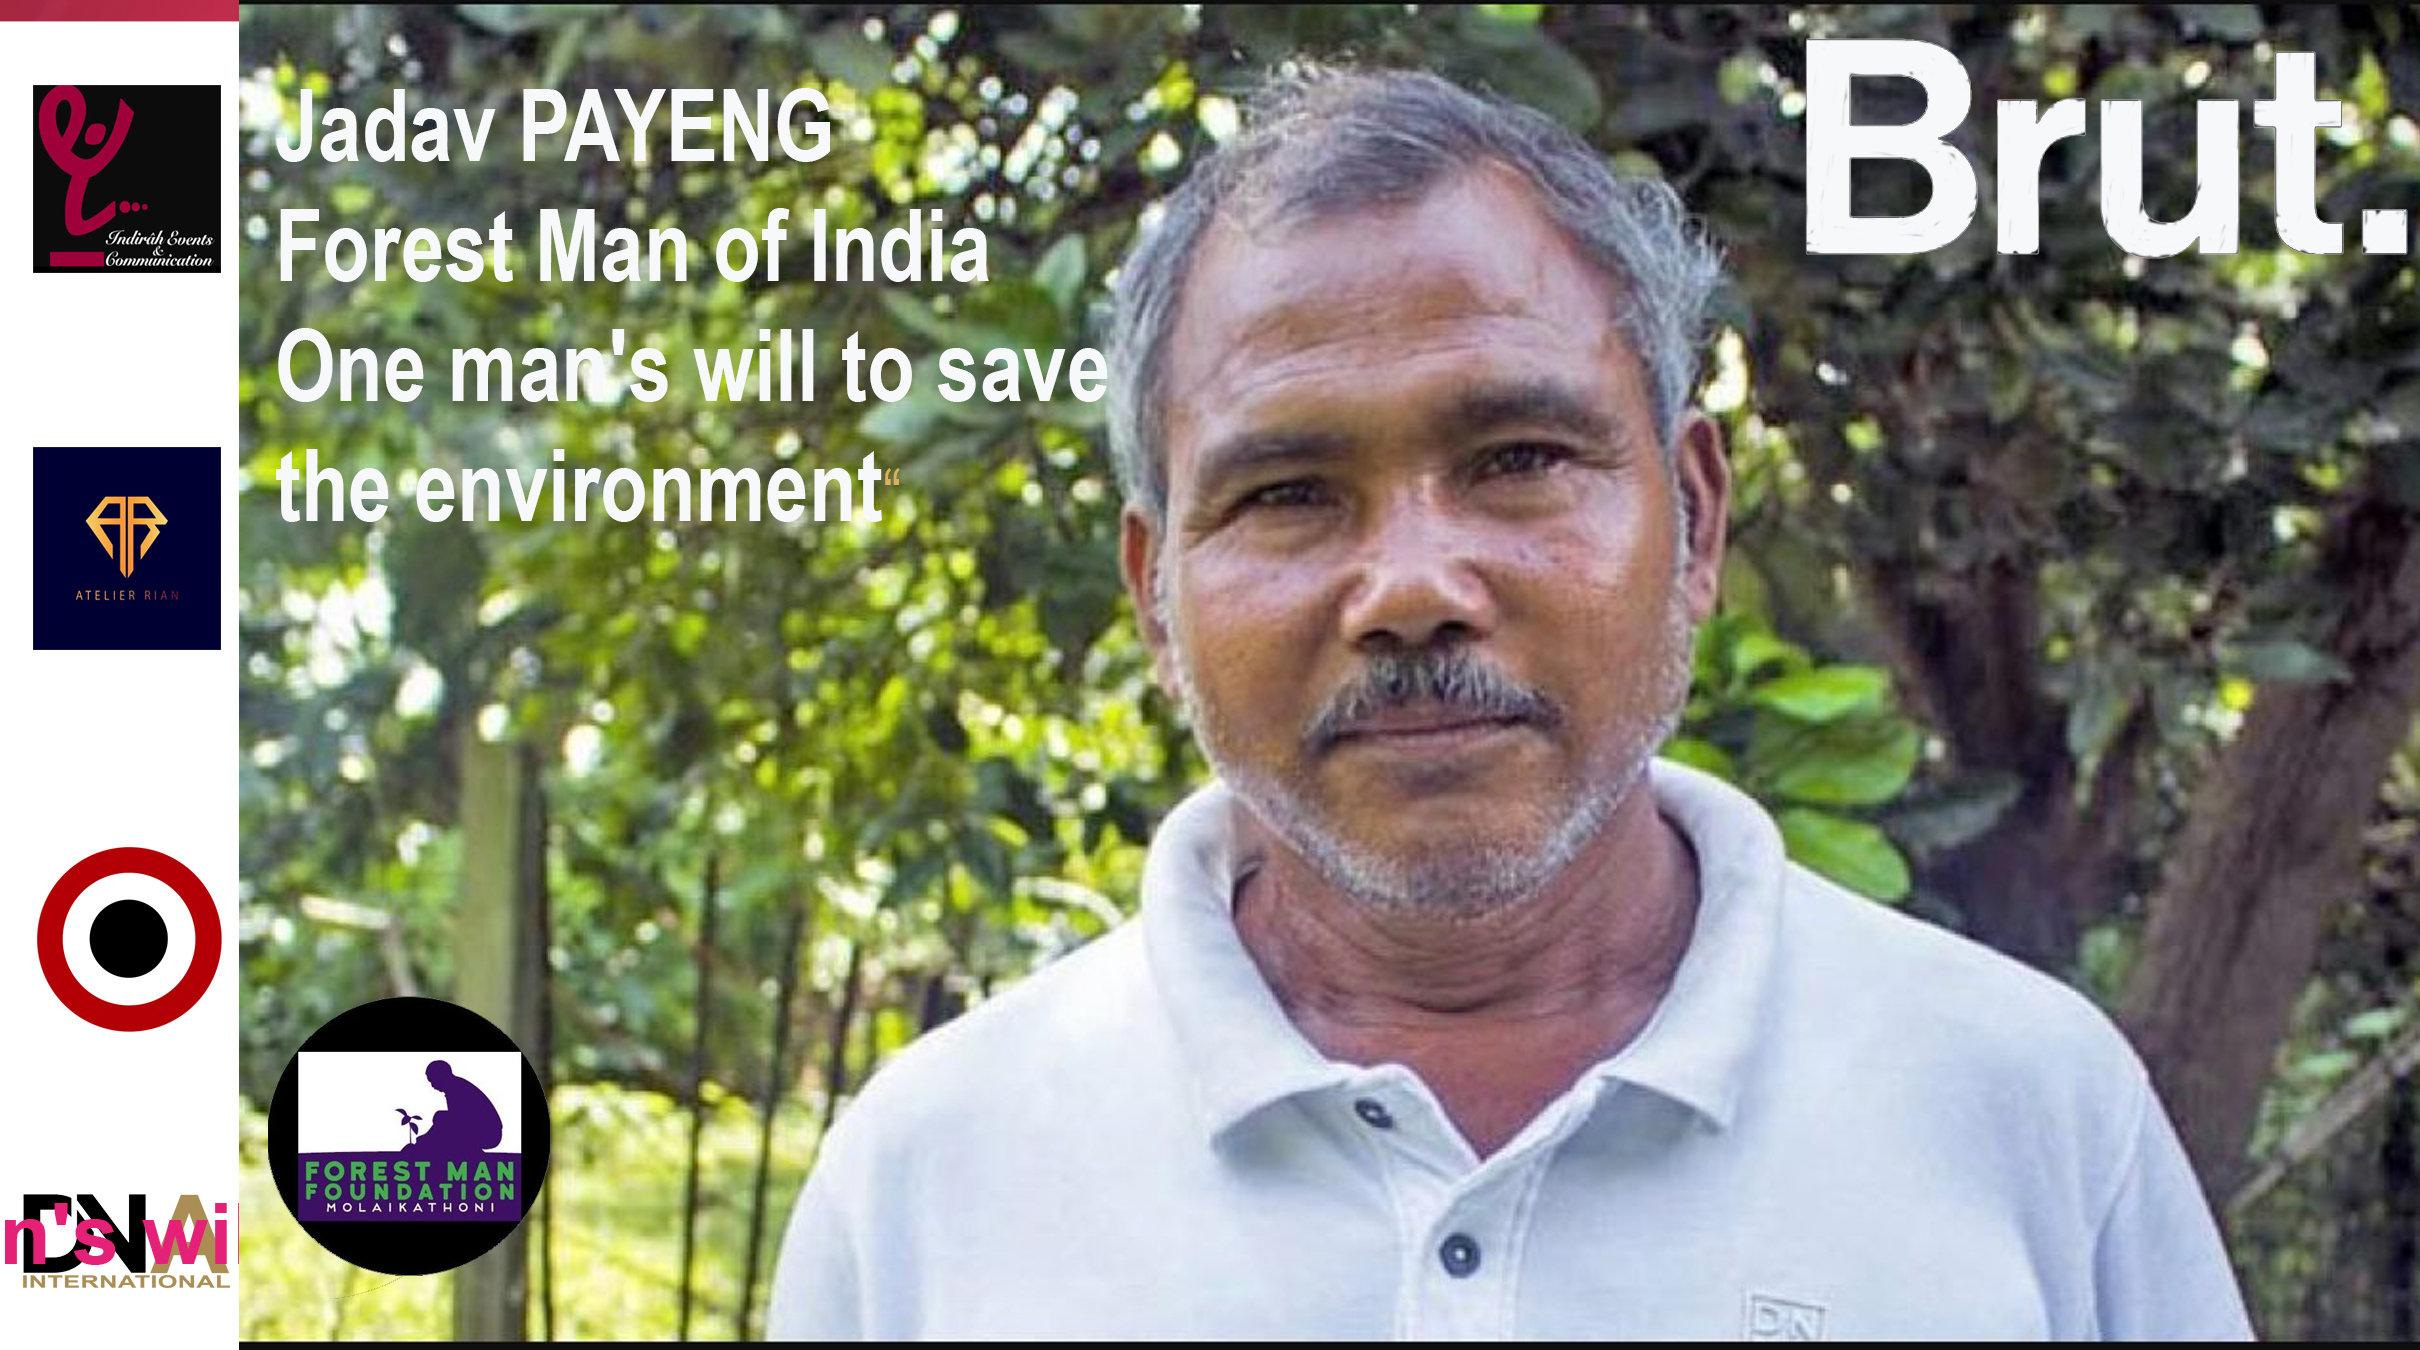 AFRICA-VOGUE-COVER-Jadav-PAYENG-Forest-Man-of-India-One-man's-will-to-save-the-environment-DN-AFRICA-MEDIA-PARTNER